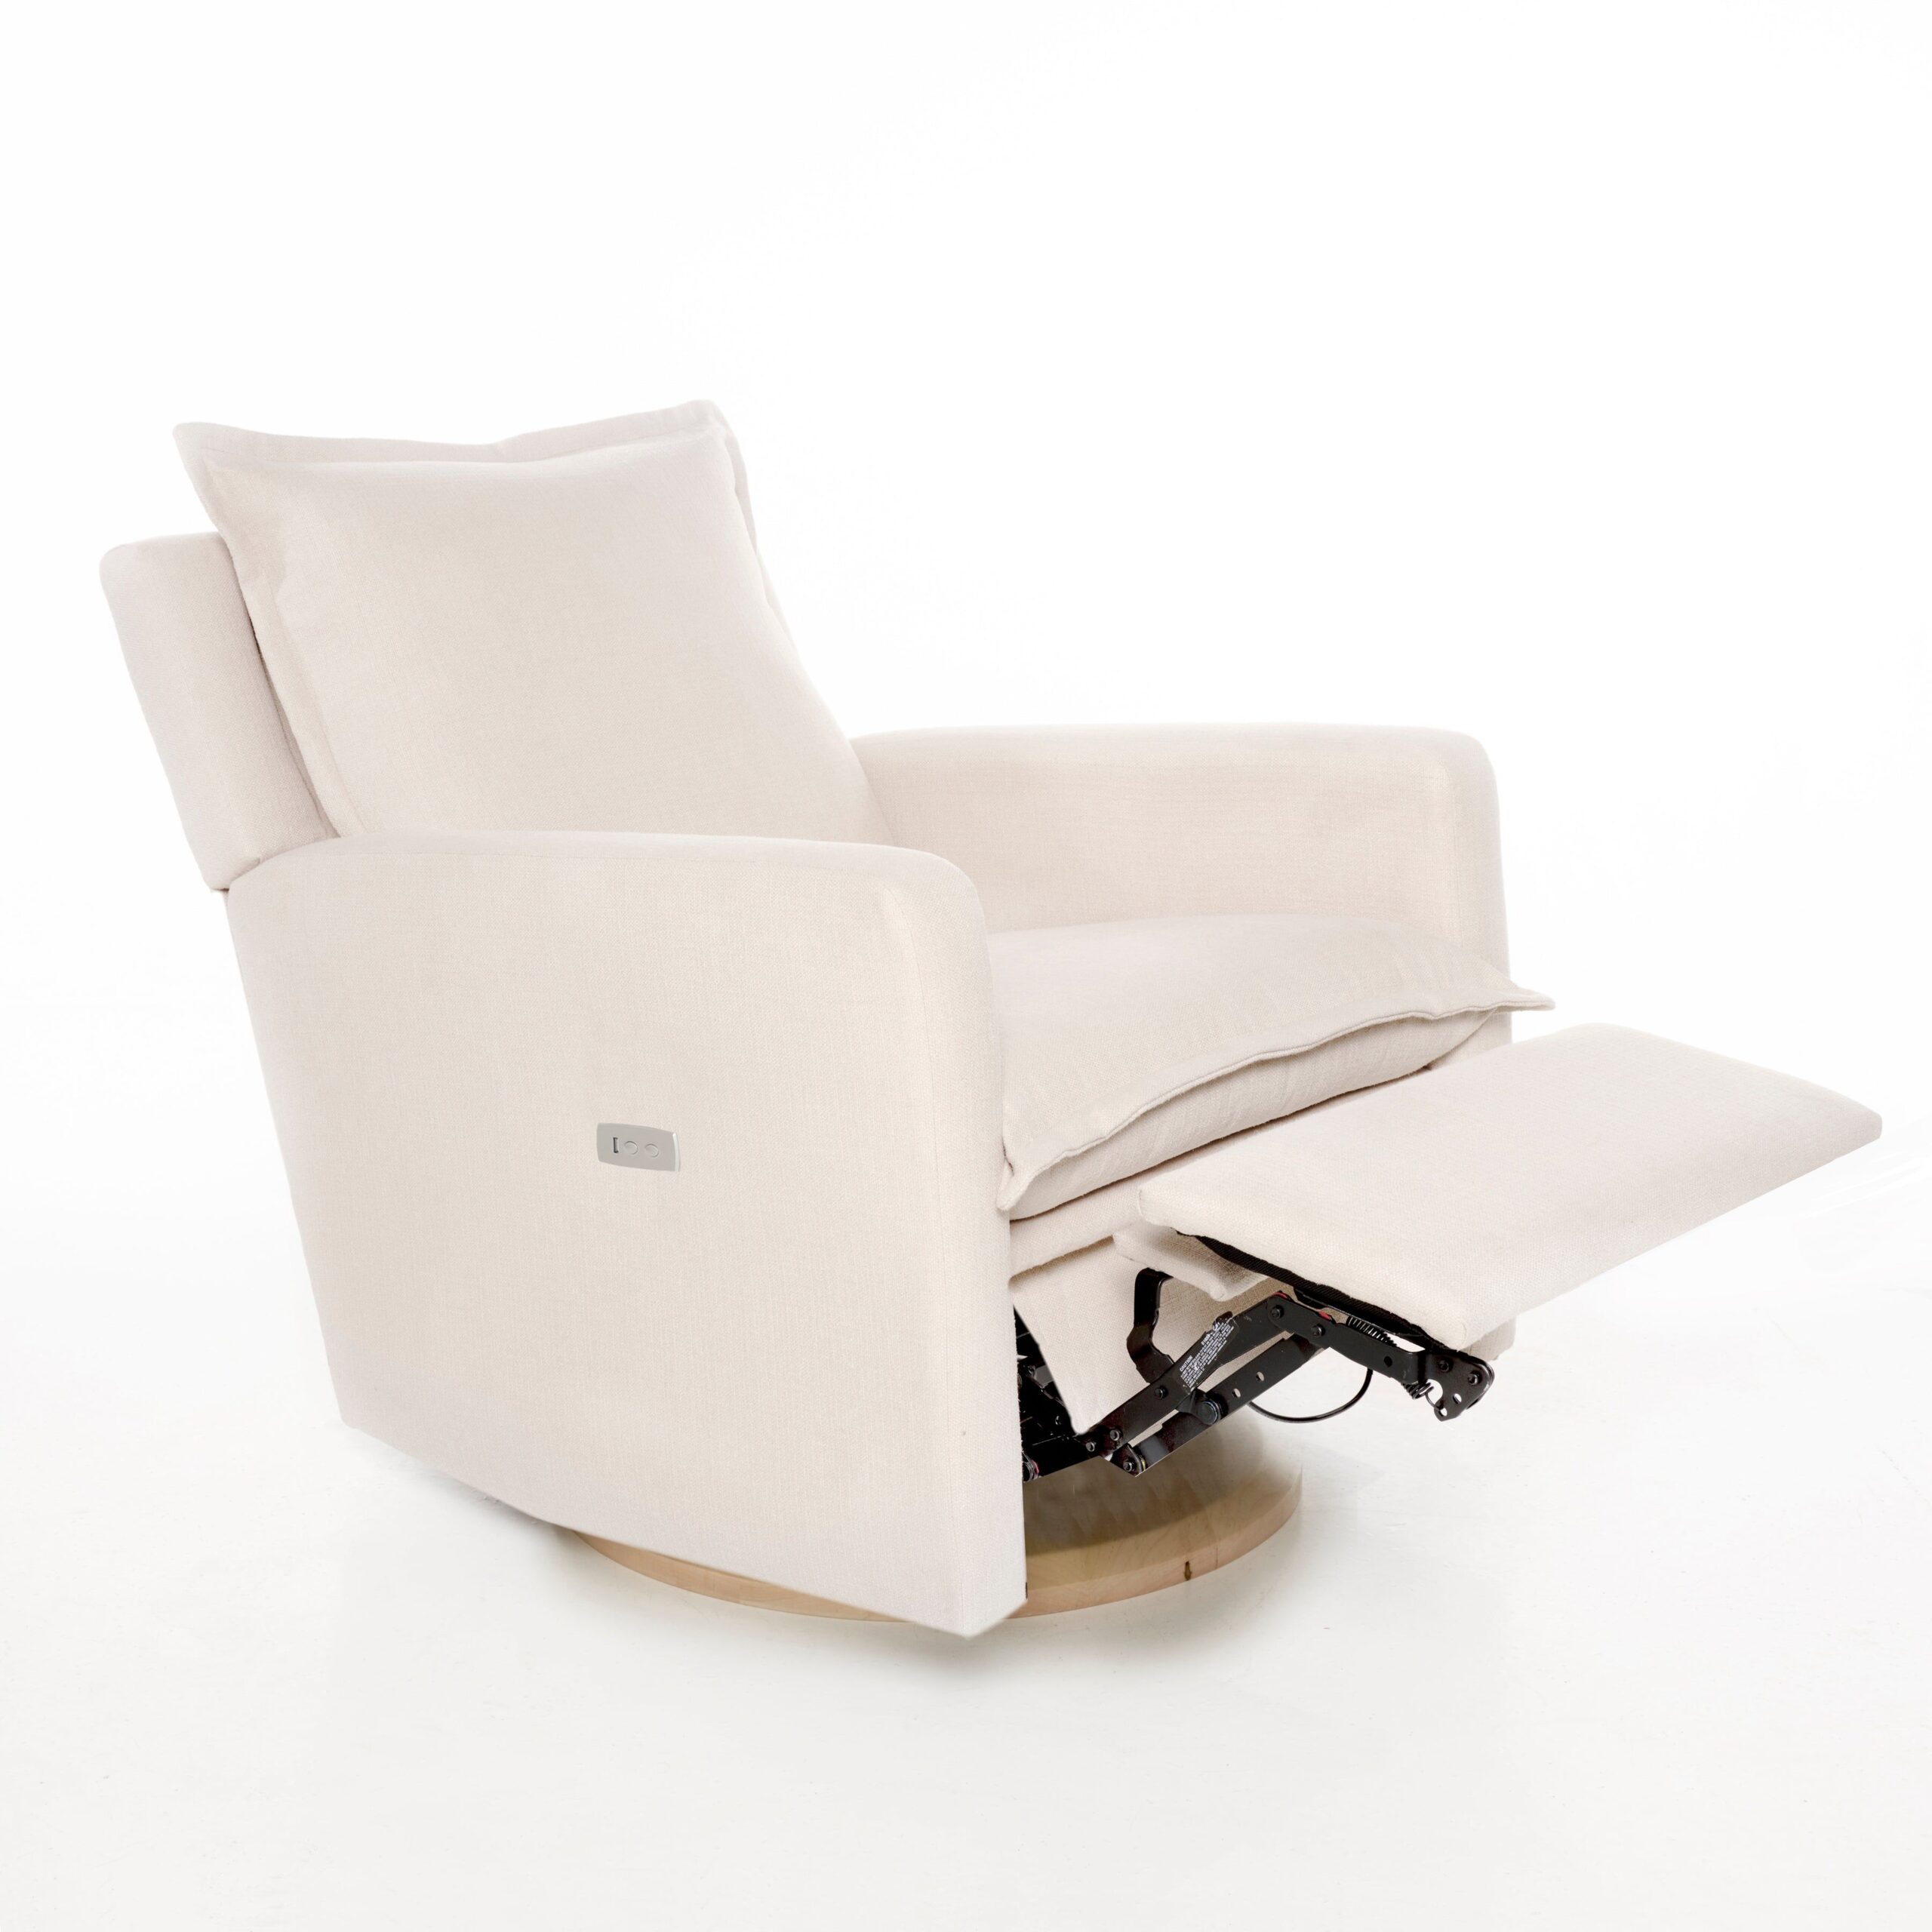 The Comfort and Relaxation of Glider Recliners